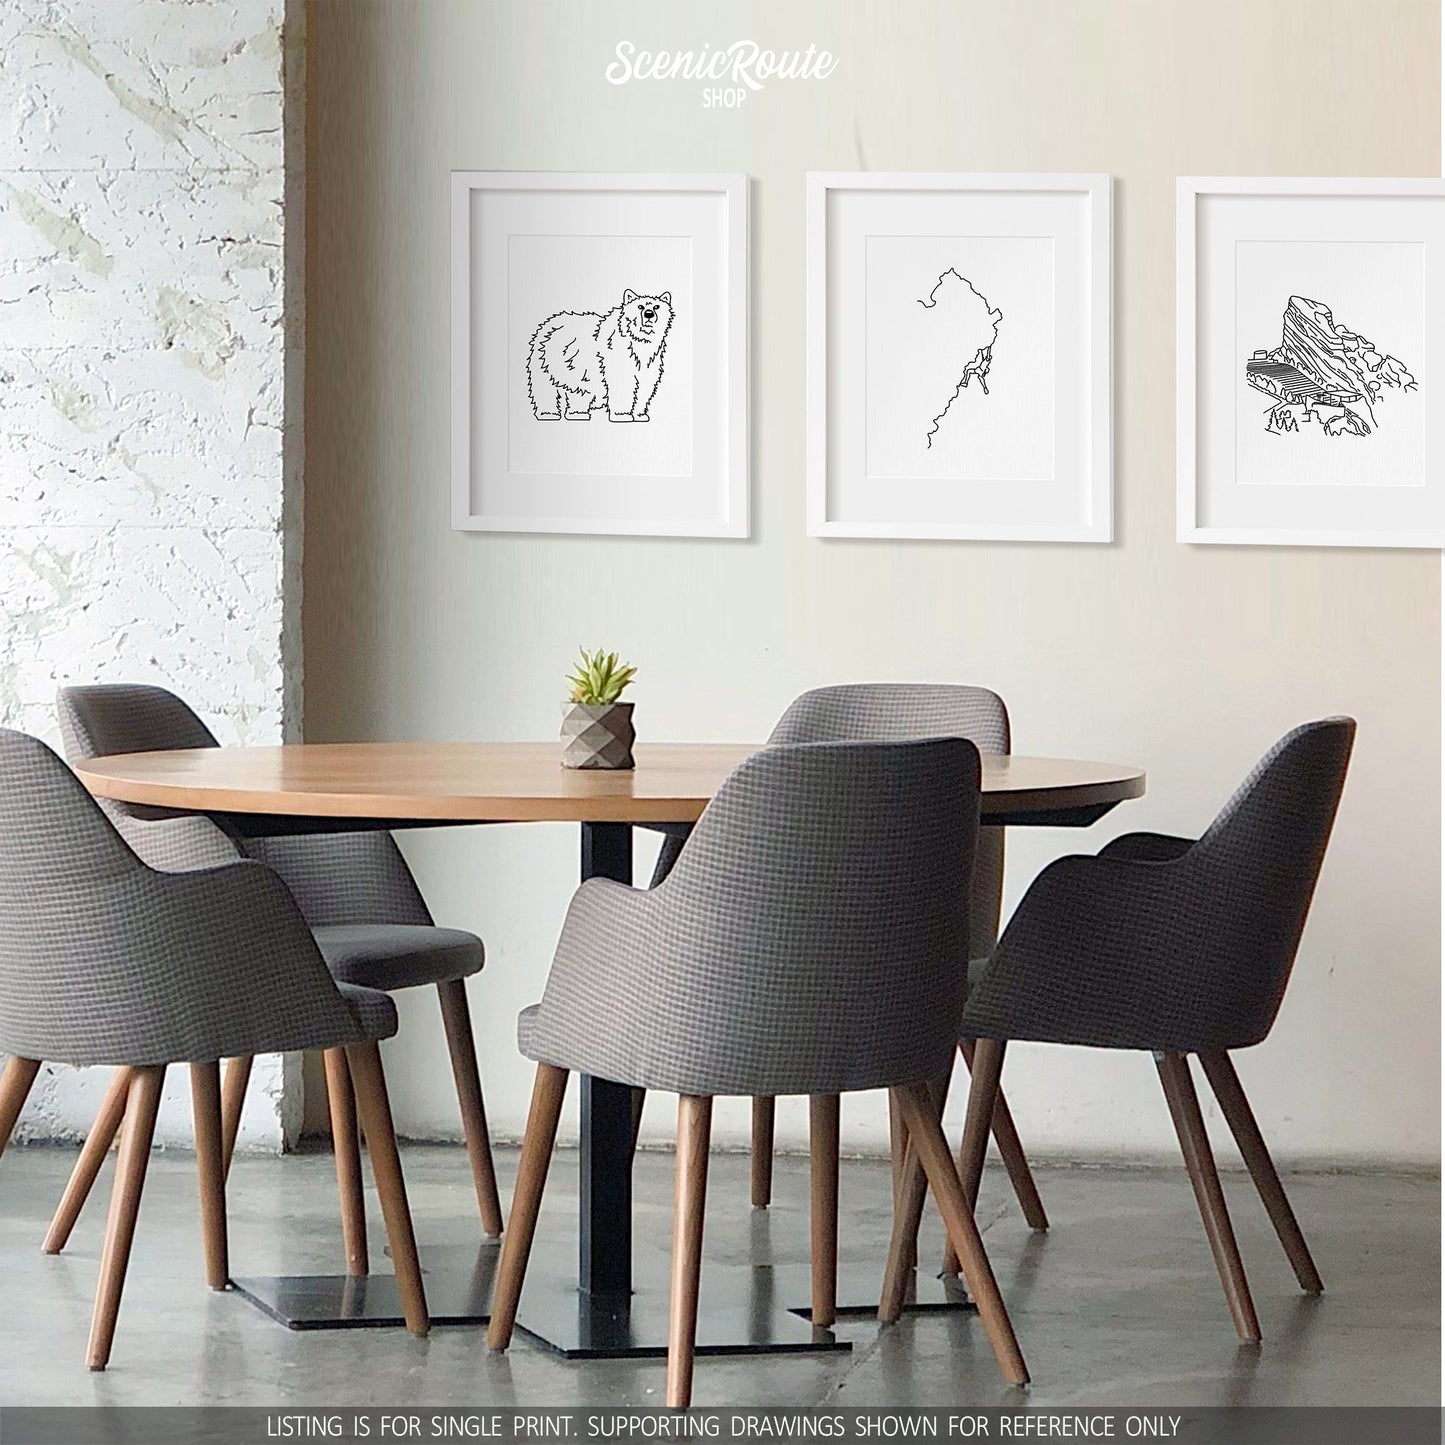 A group of three framed drawings above a dining table. The line art drawings include a Grizzly Bear, Rock Climbing, and Red Rocks Amphitheatre